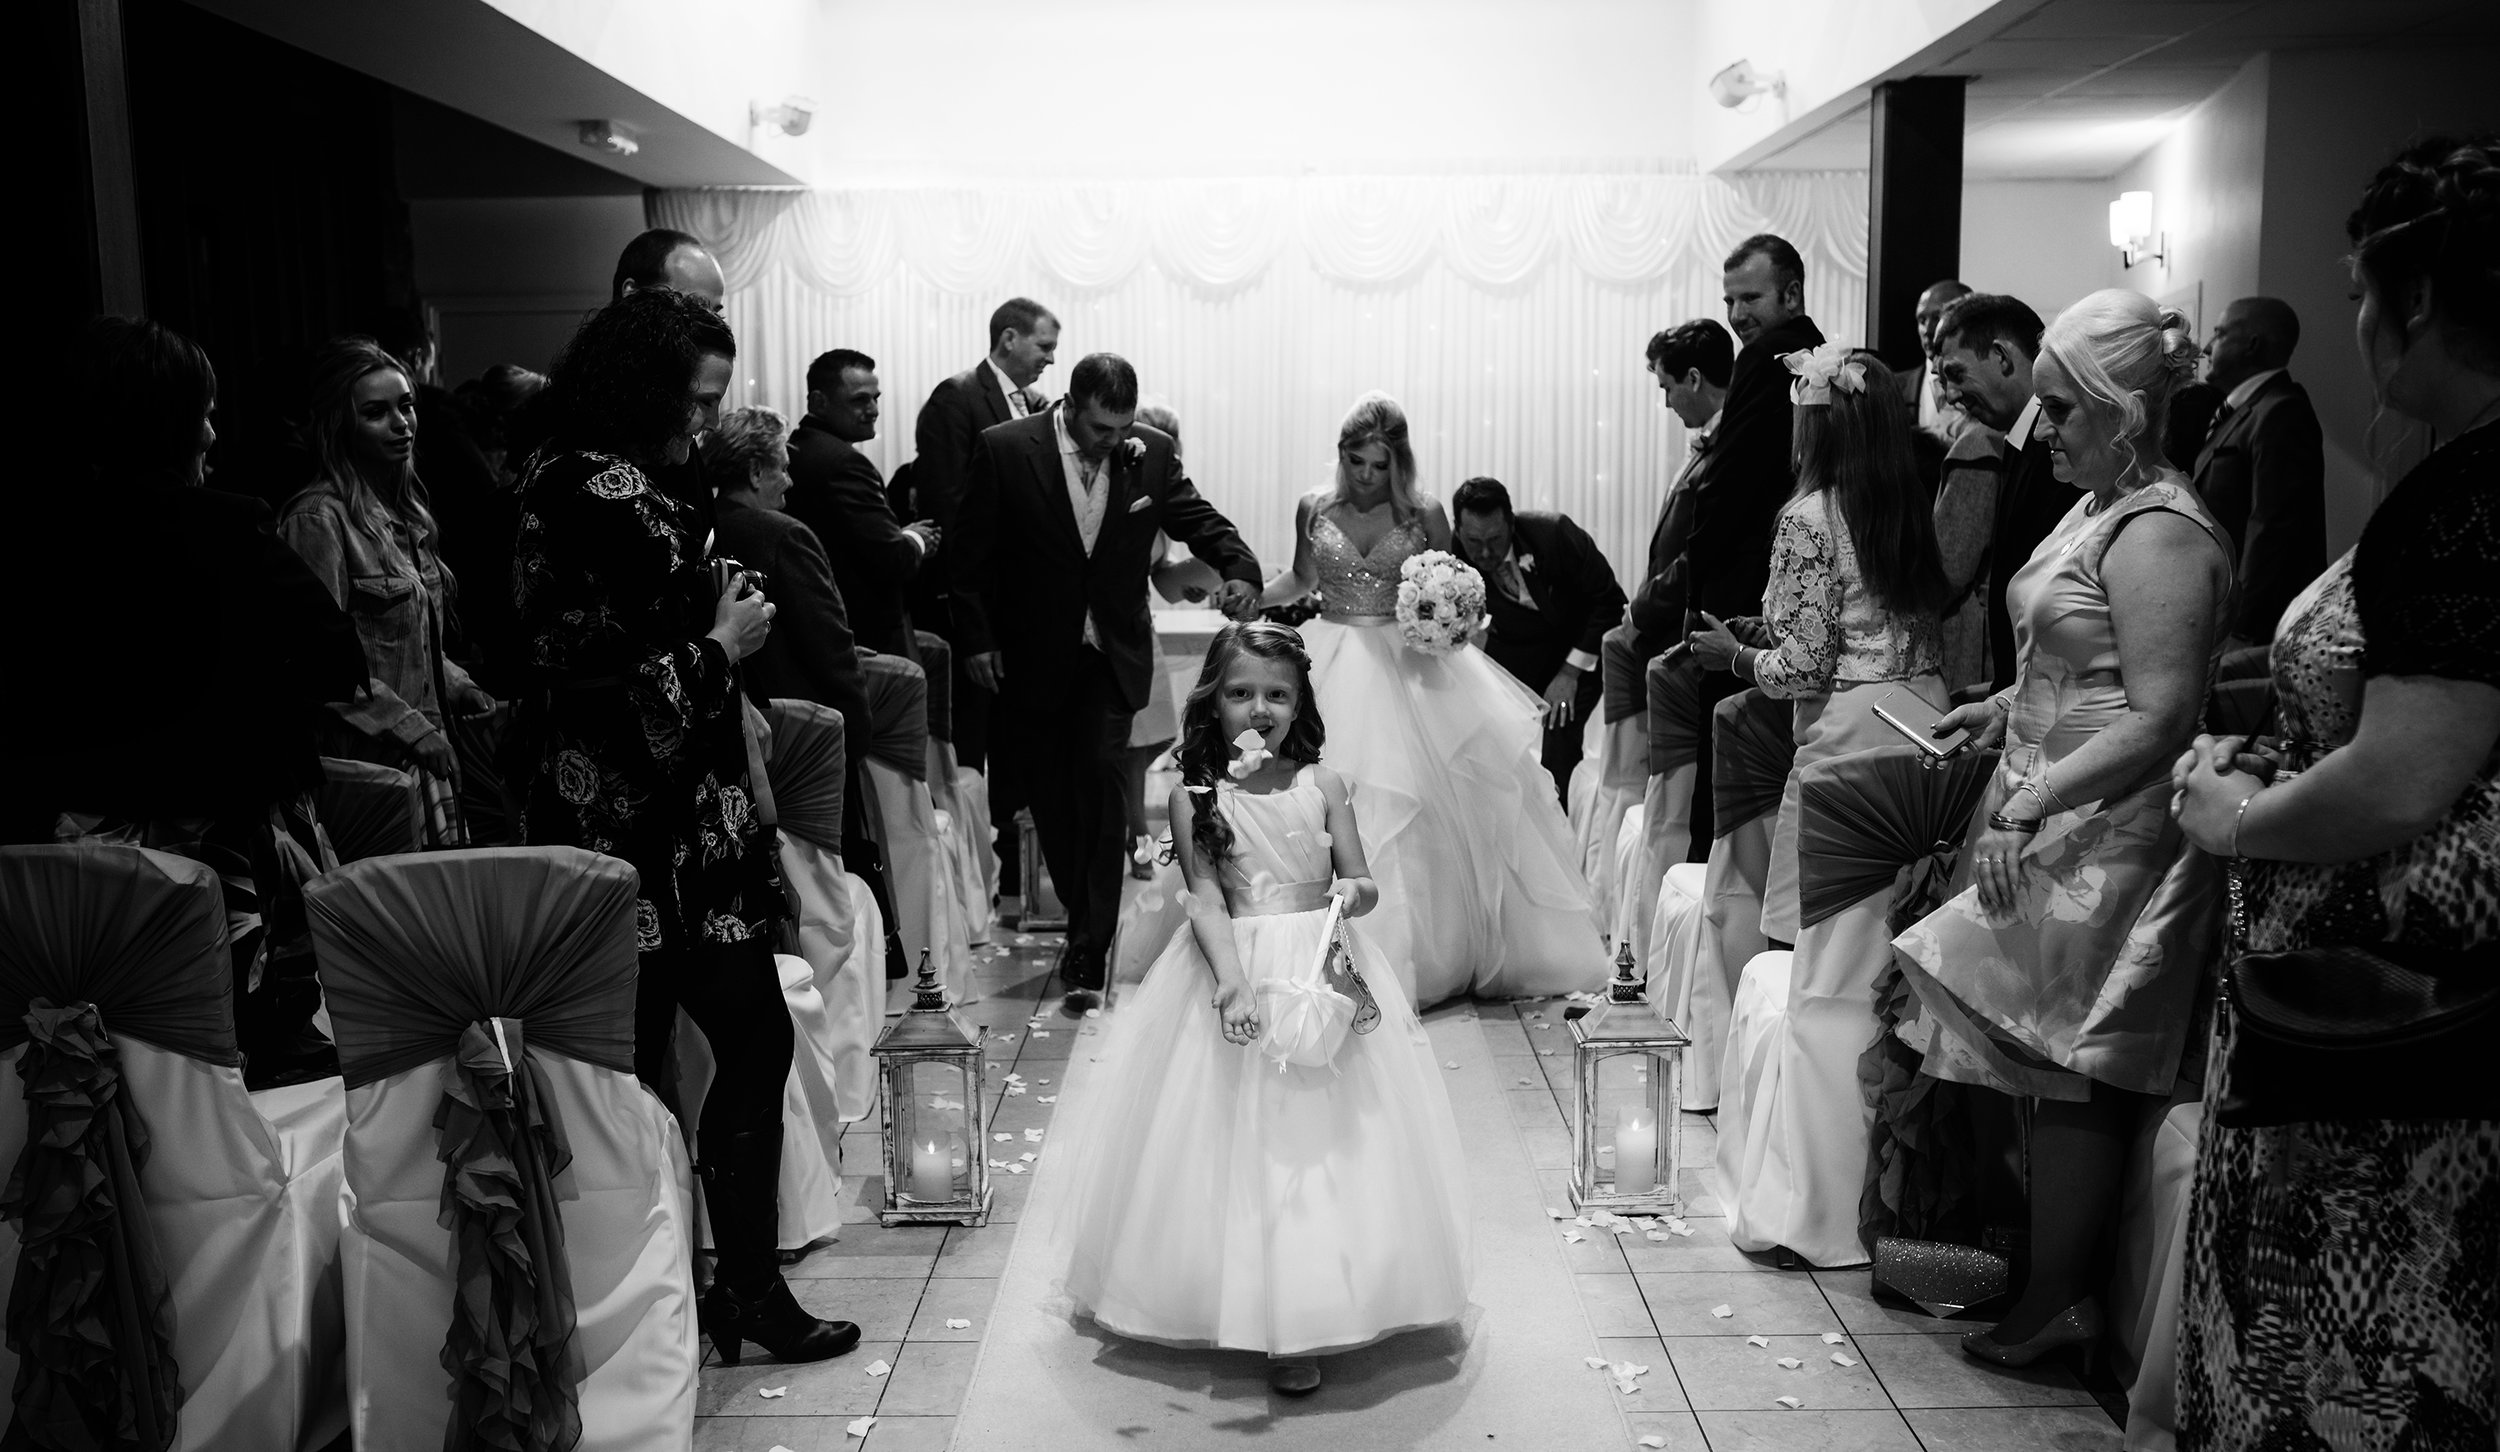 Flower girl sprinkling flowers during the happy couples exit